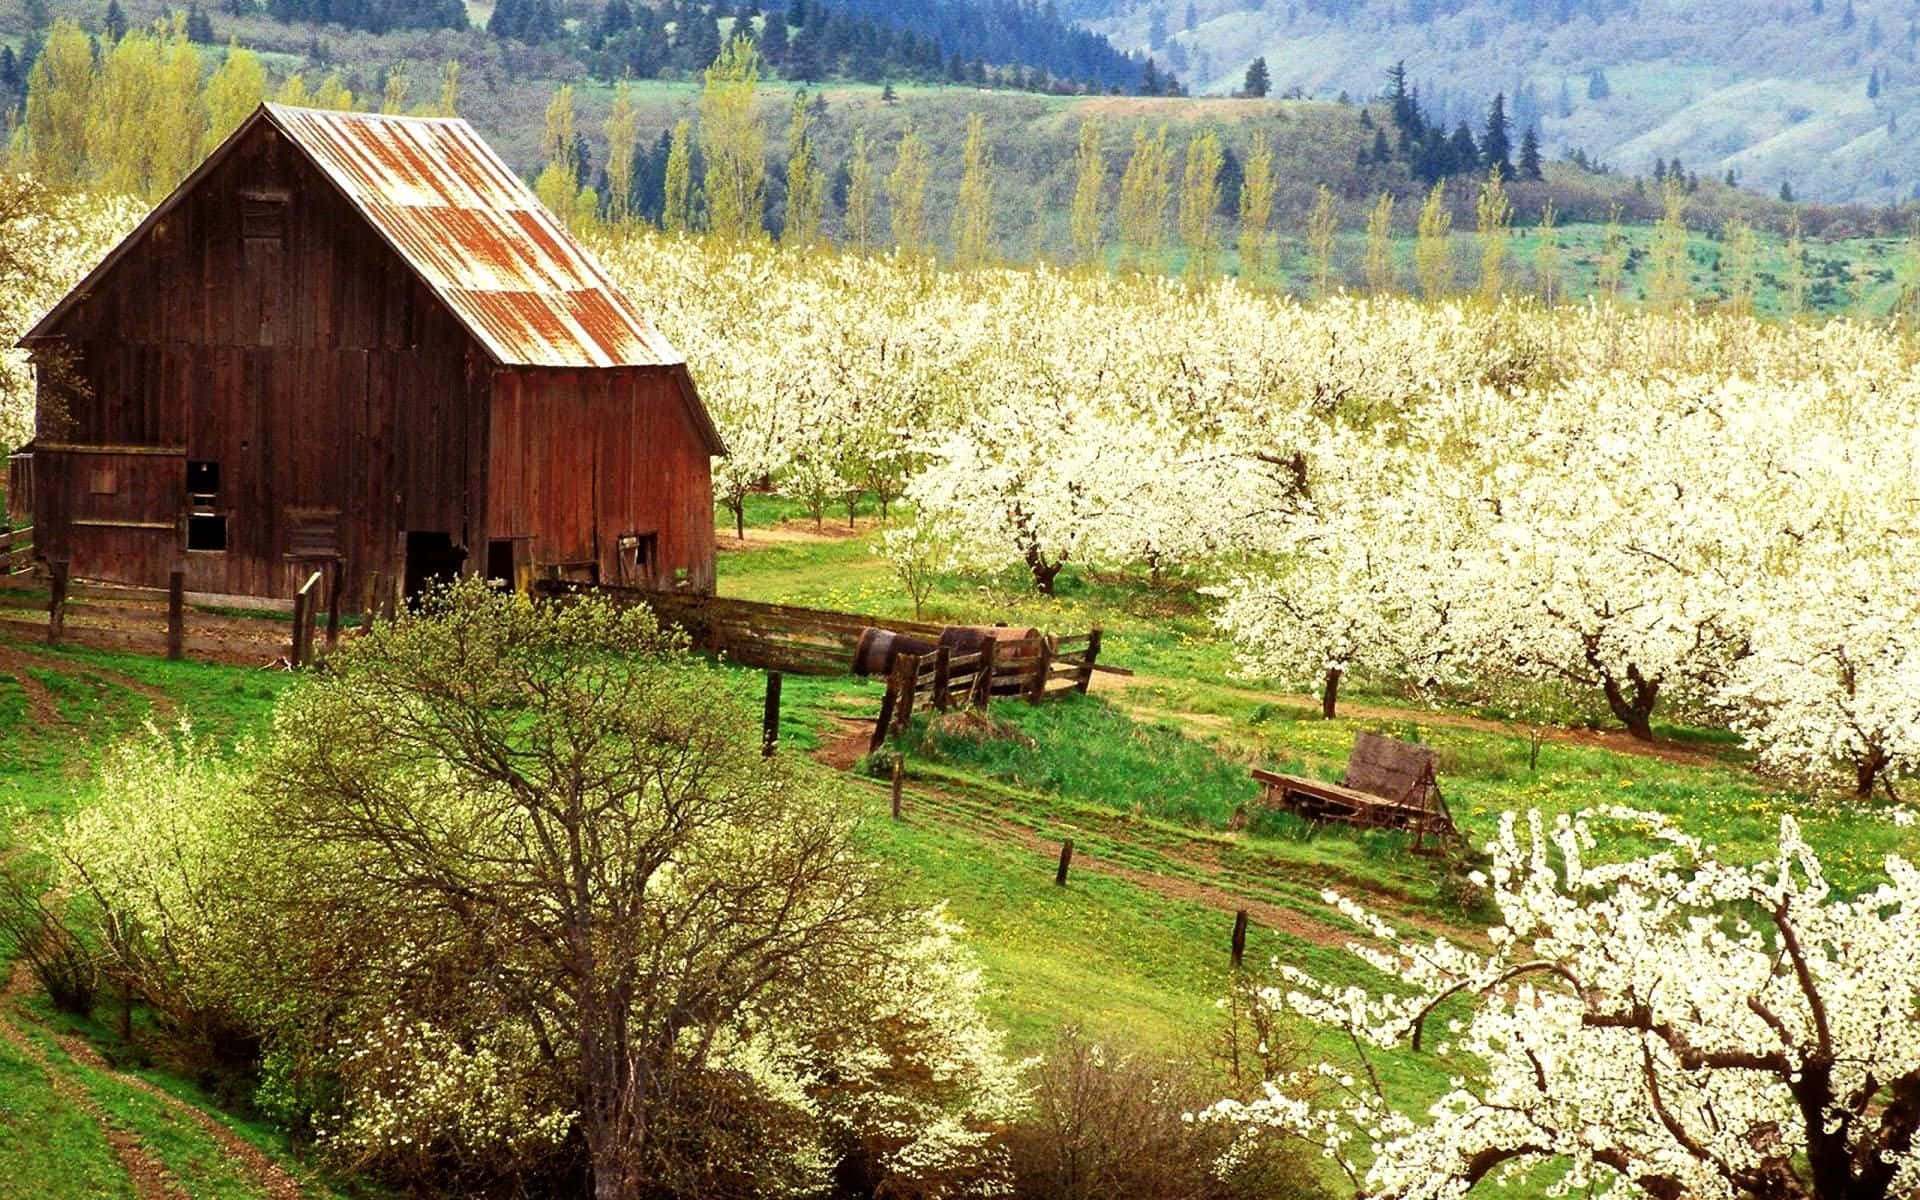 A Barn In The Middle Of A Field With Blossoming Trees